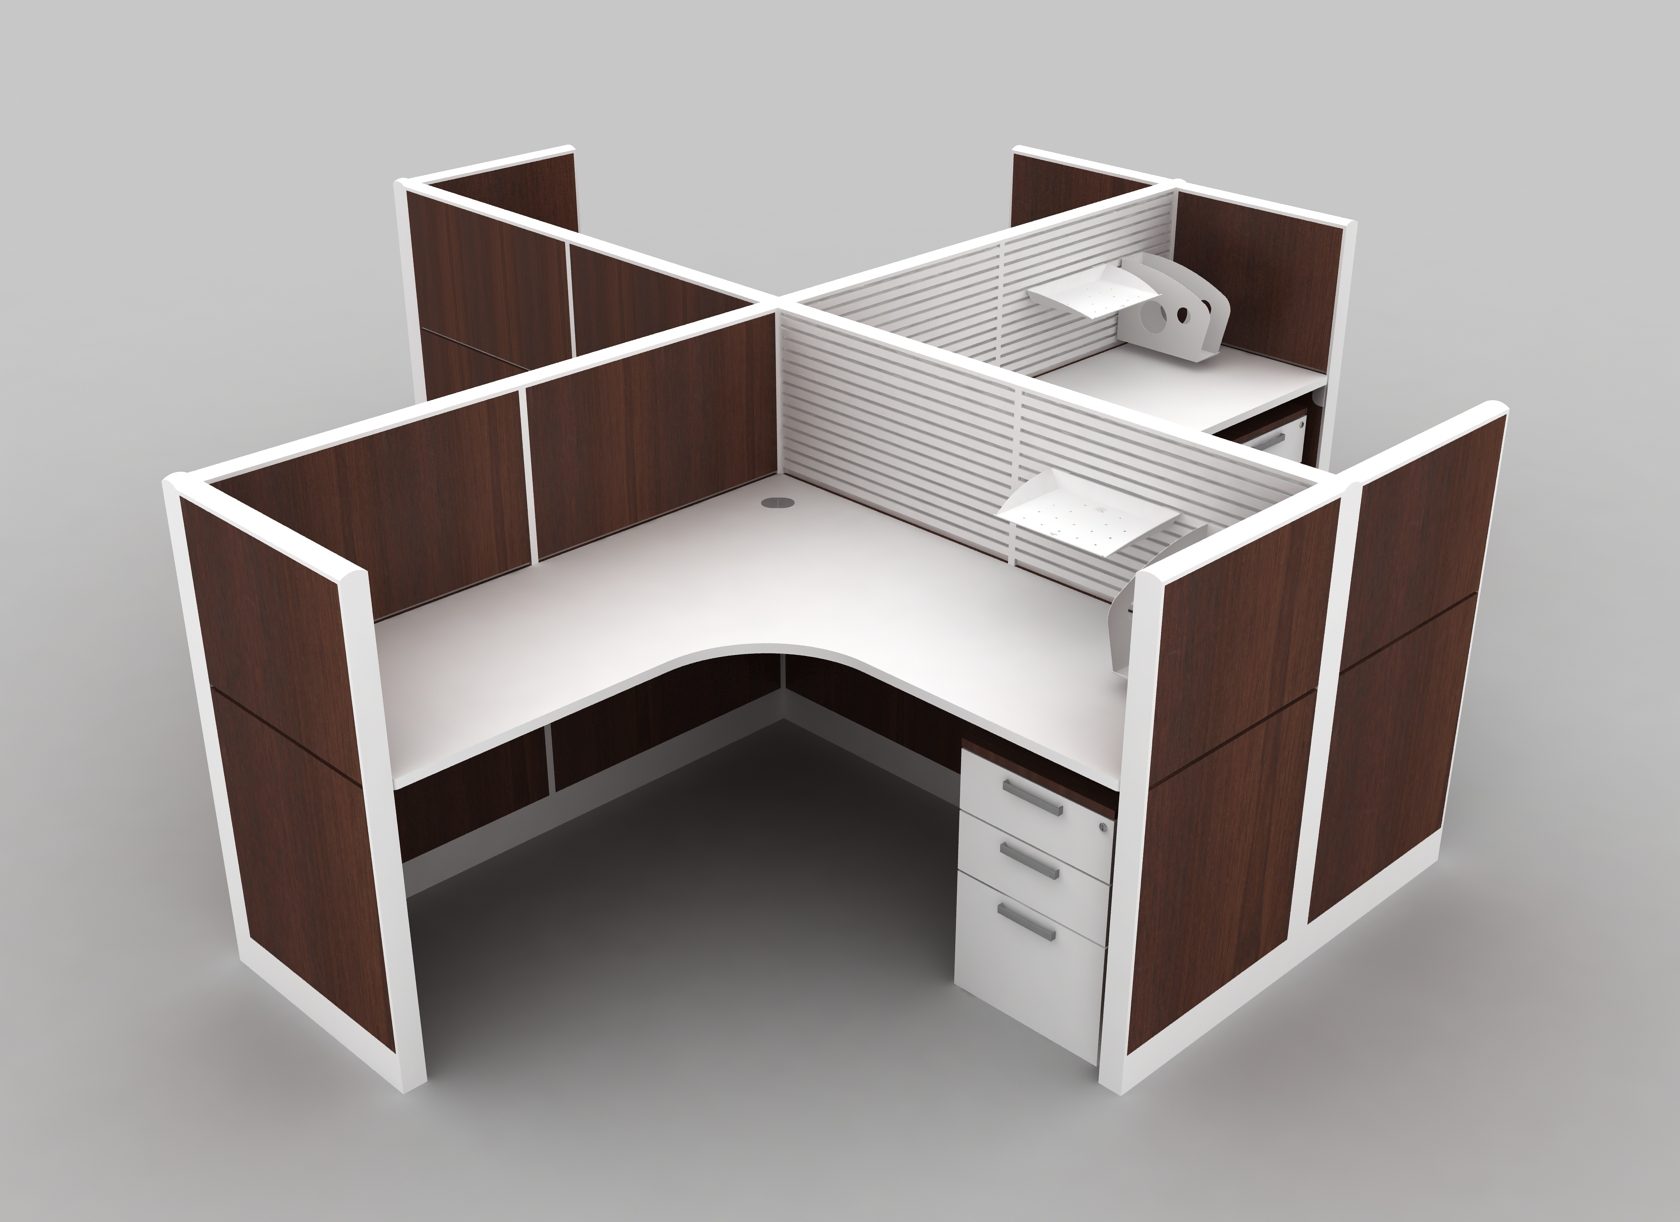 RX2 wood panel partition cubicle for a three men workstation